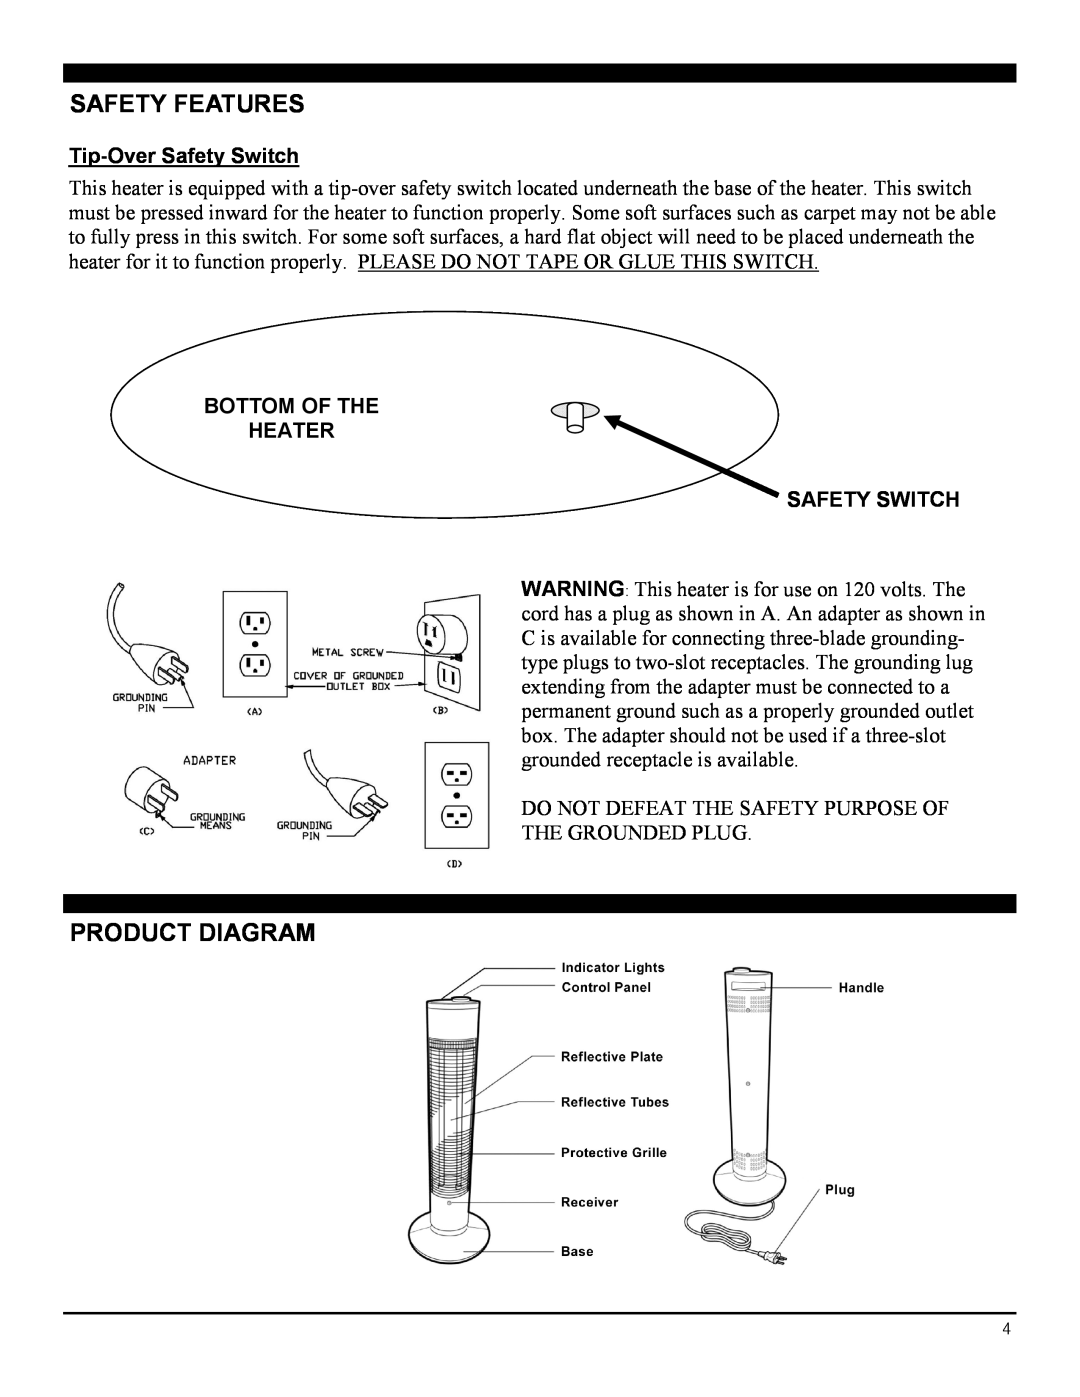 Soleus Air MS-14R manual Safety Features, Product Diagram, Tip-OverSafety Switch, Bottom Of The Heater Safety Switch 